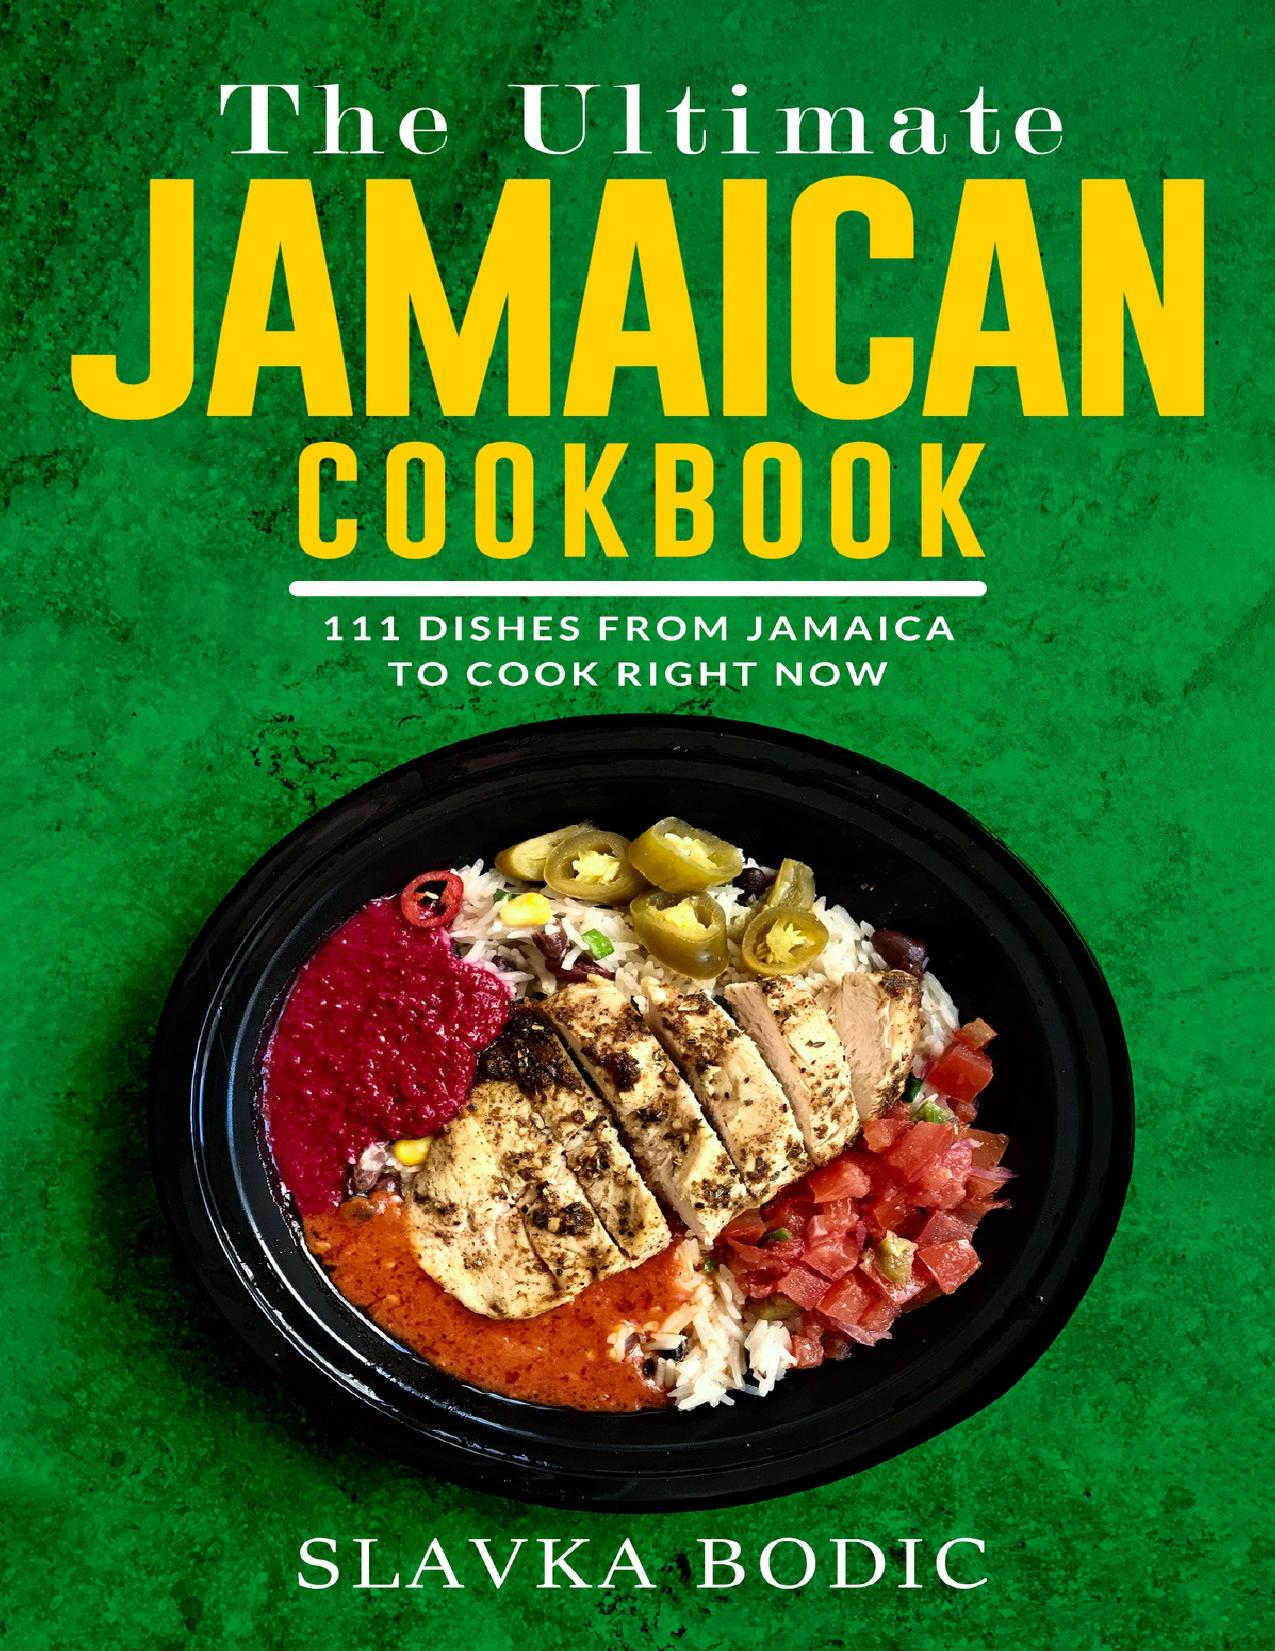 The Ultimate Jamaican Cookbook: 111 Dishes From Jamaica To Cook Right Now by Bodic Slavka